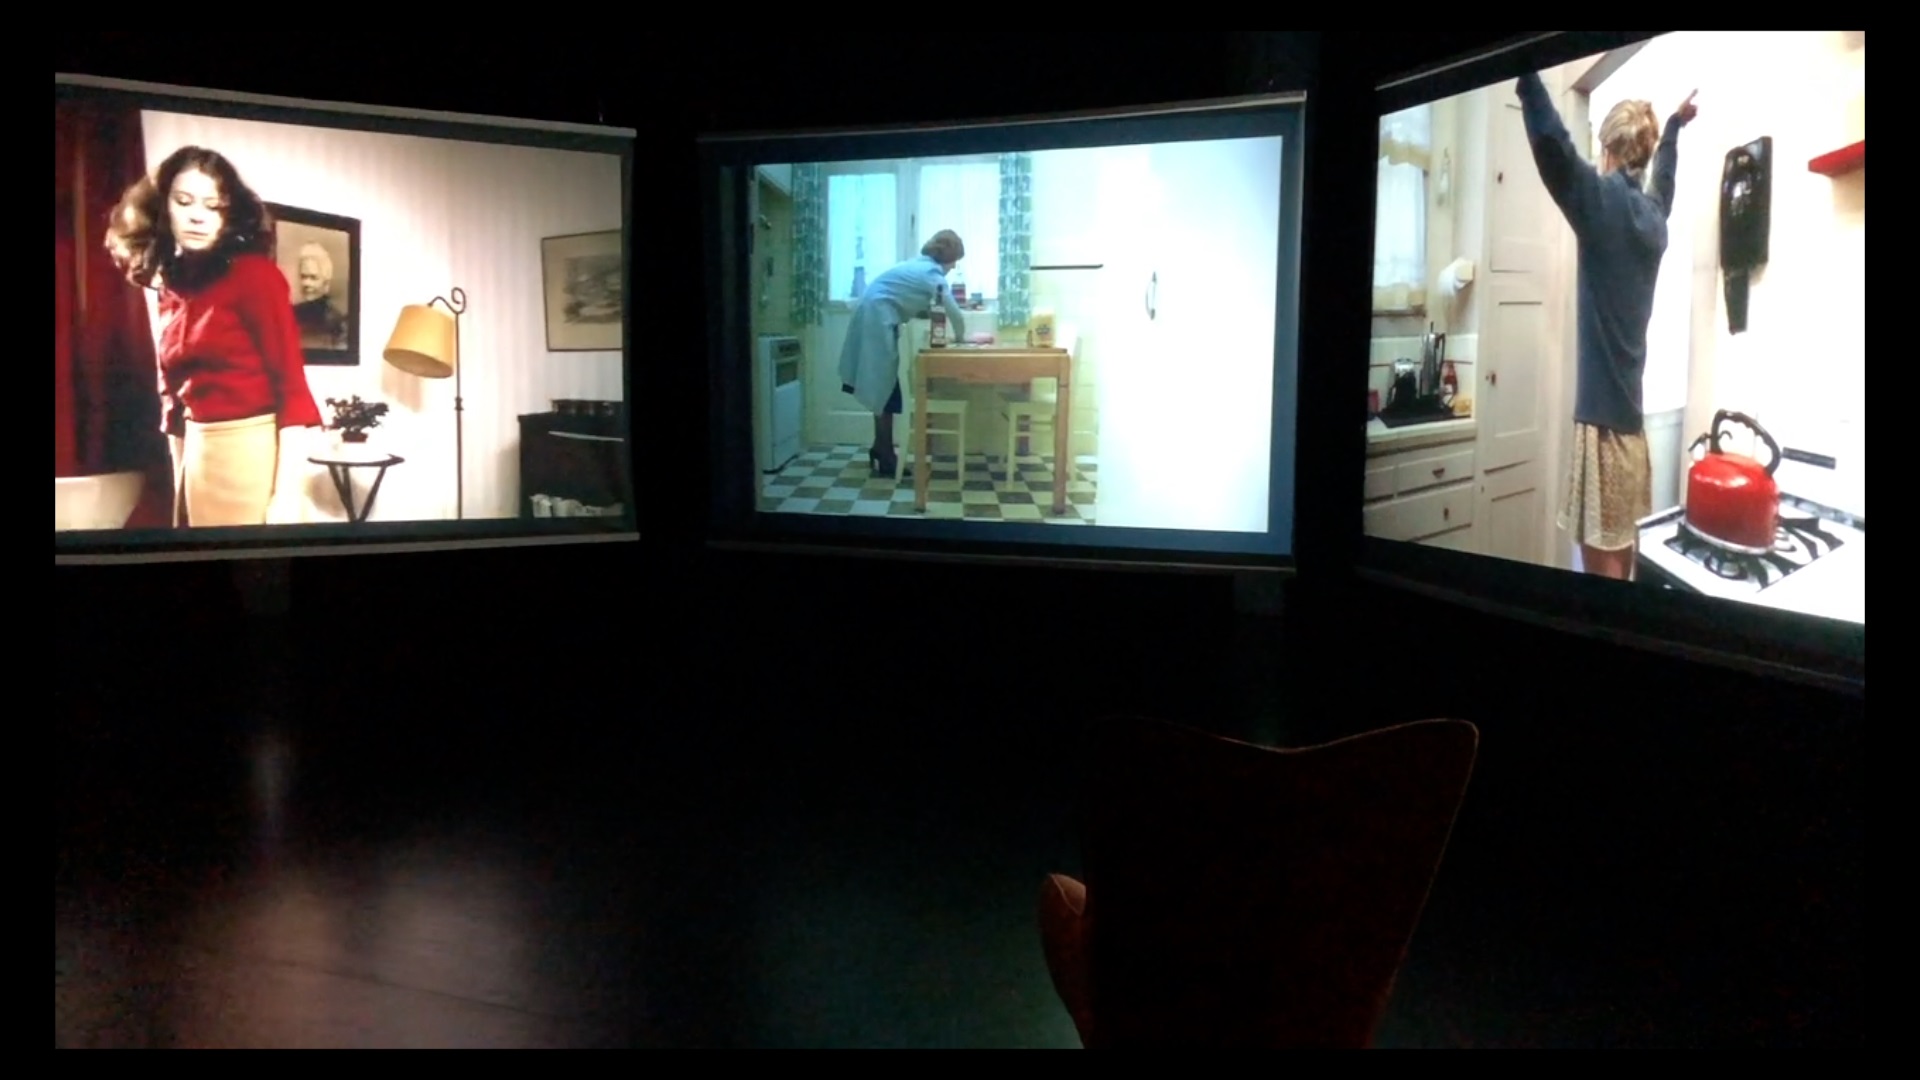 Three big screens showing movie scenes in front of a chair.